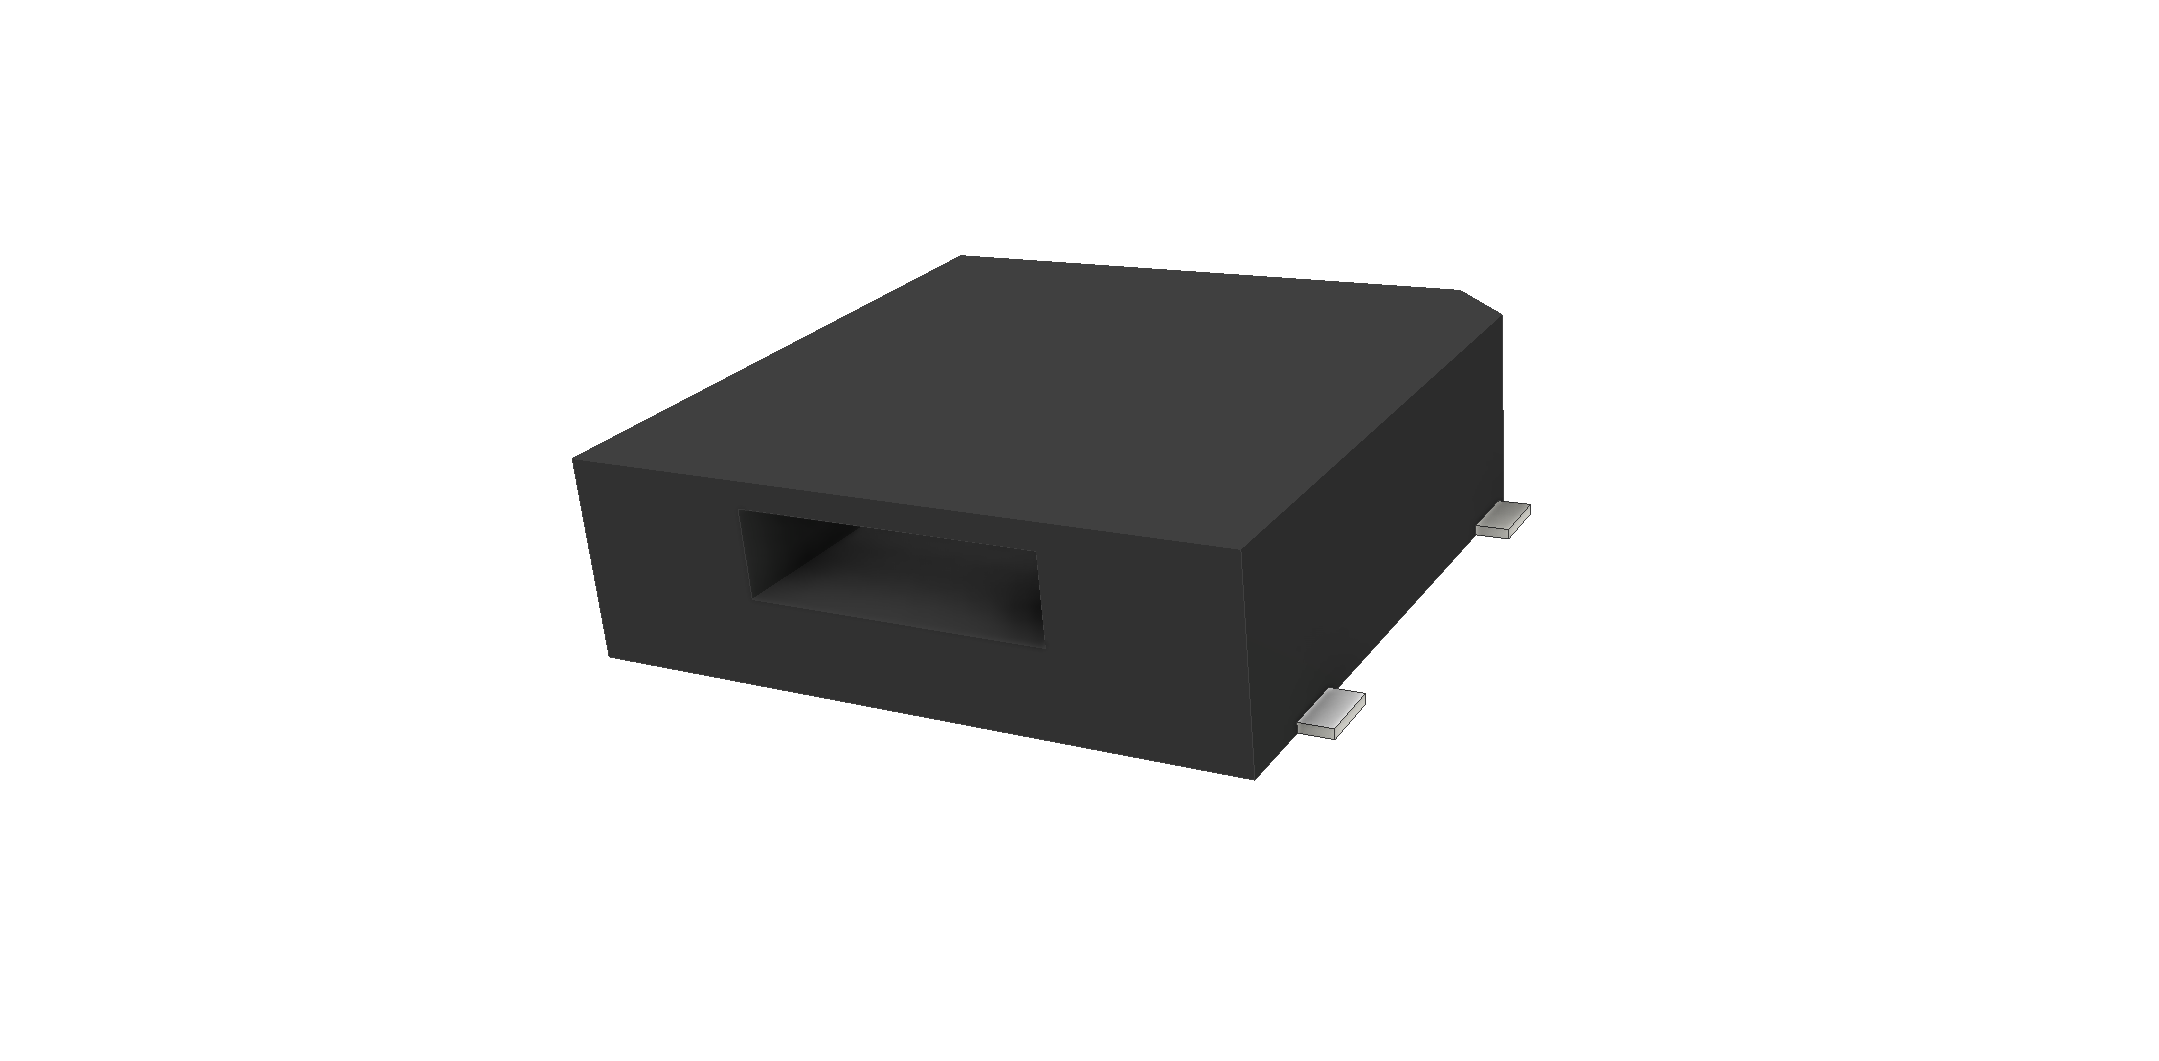 Product Image for SMT-1027-S-4-R